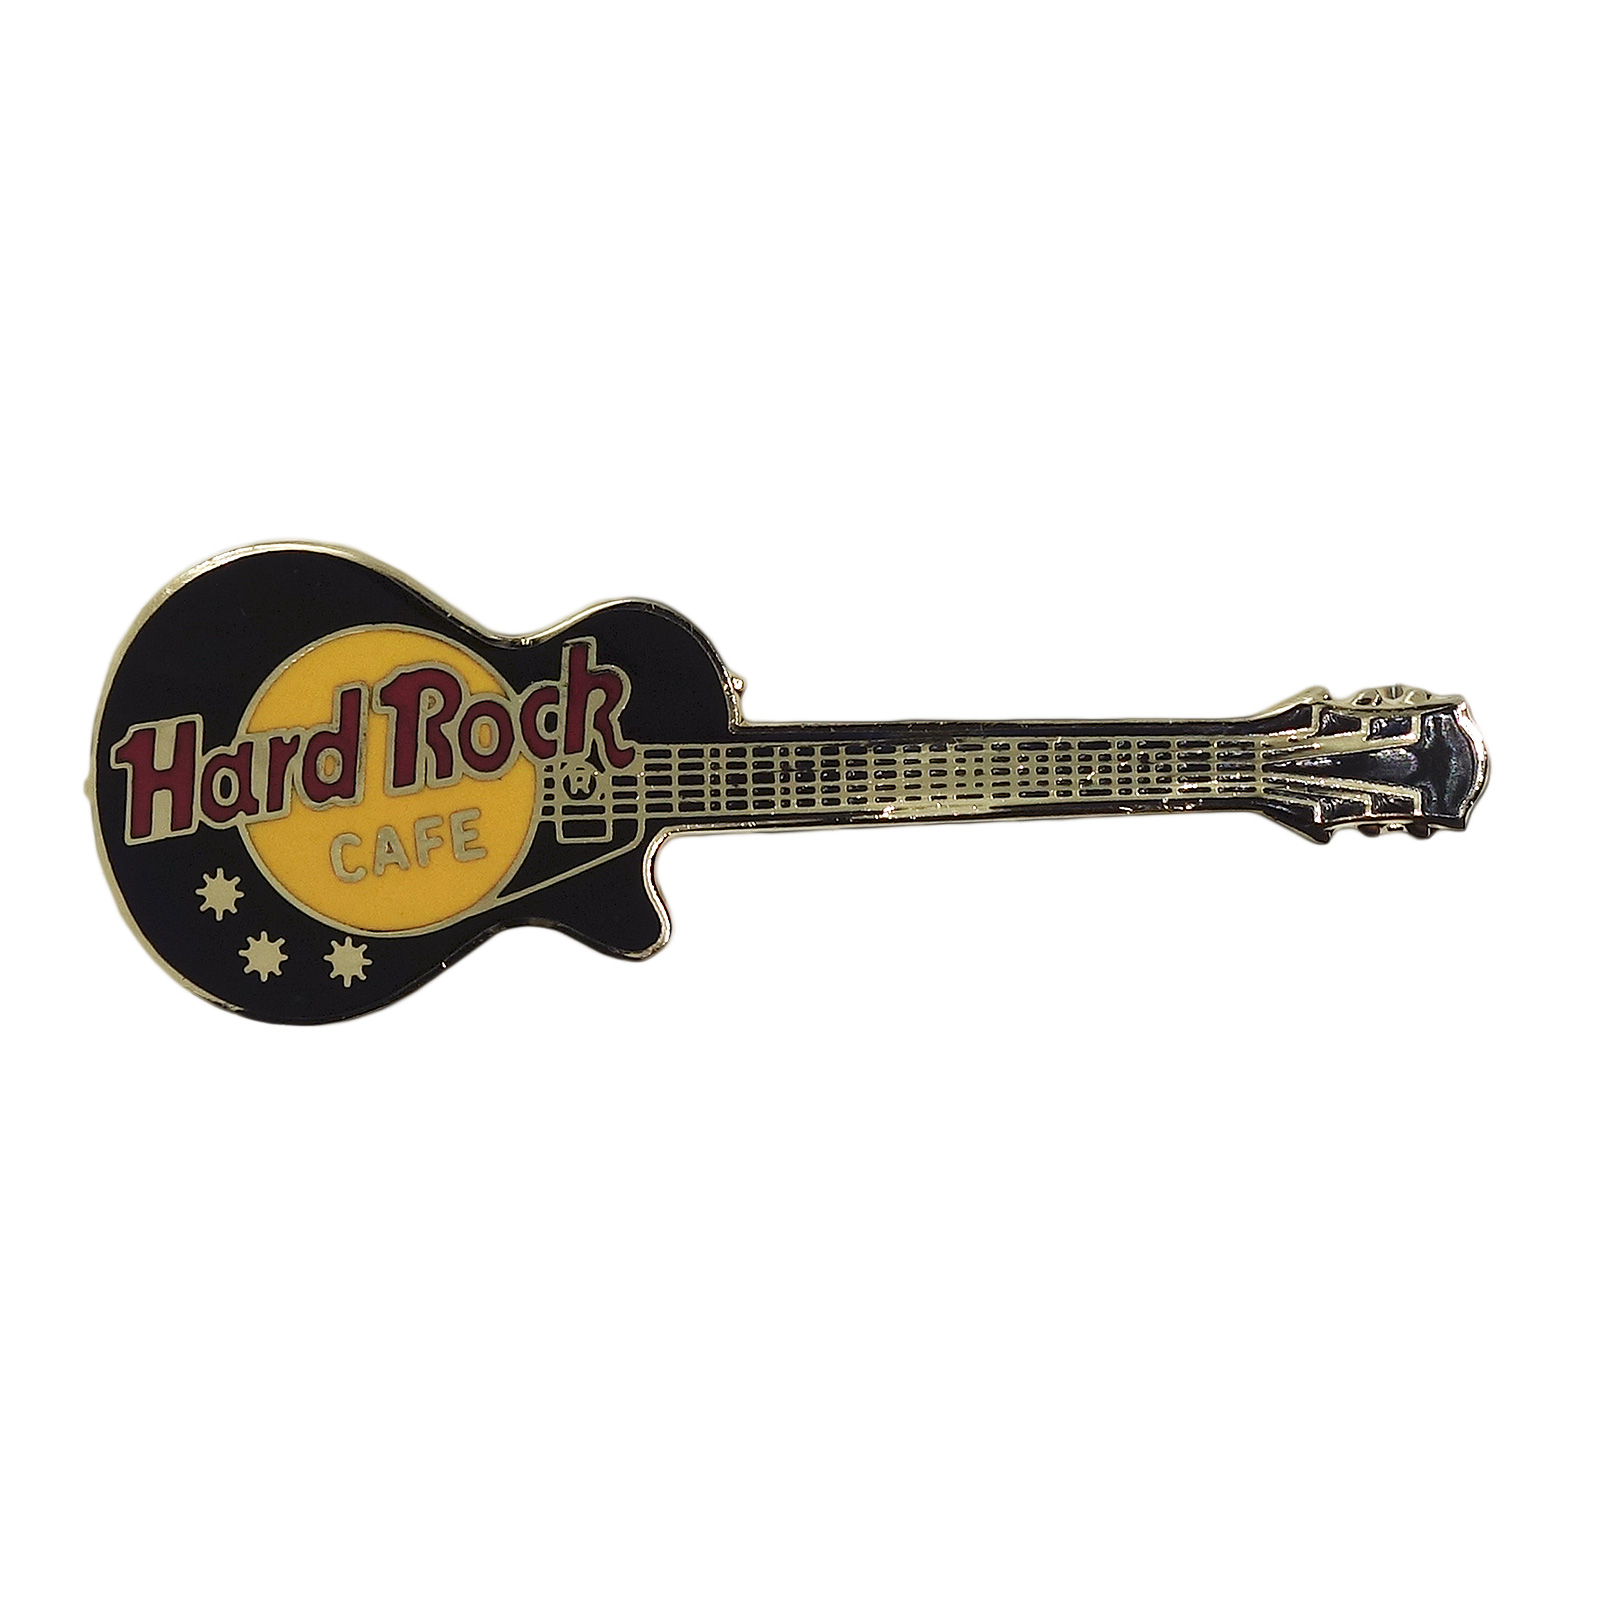 Hard Rock CAFE ギター ブローチ ハードロックカフェ